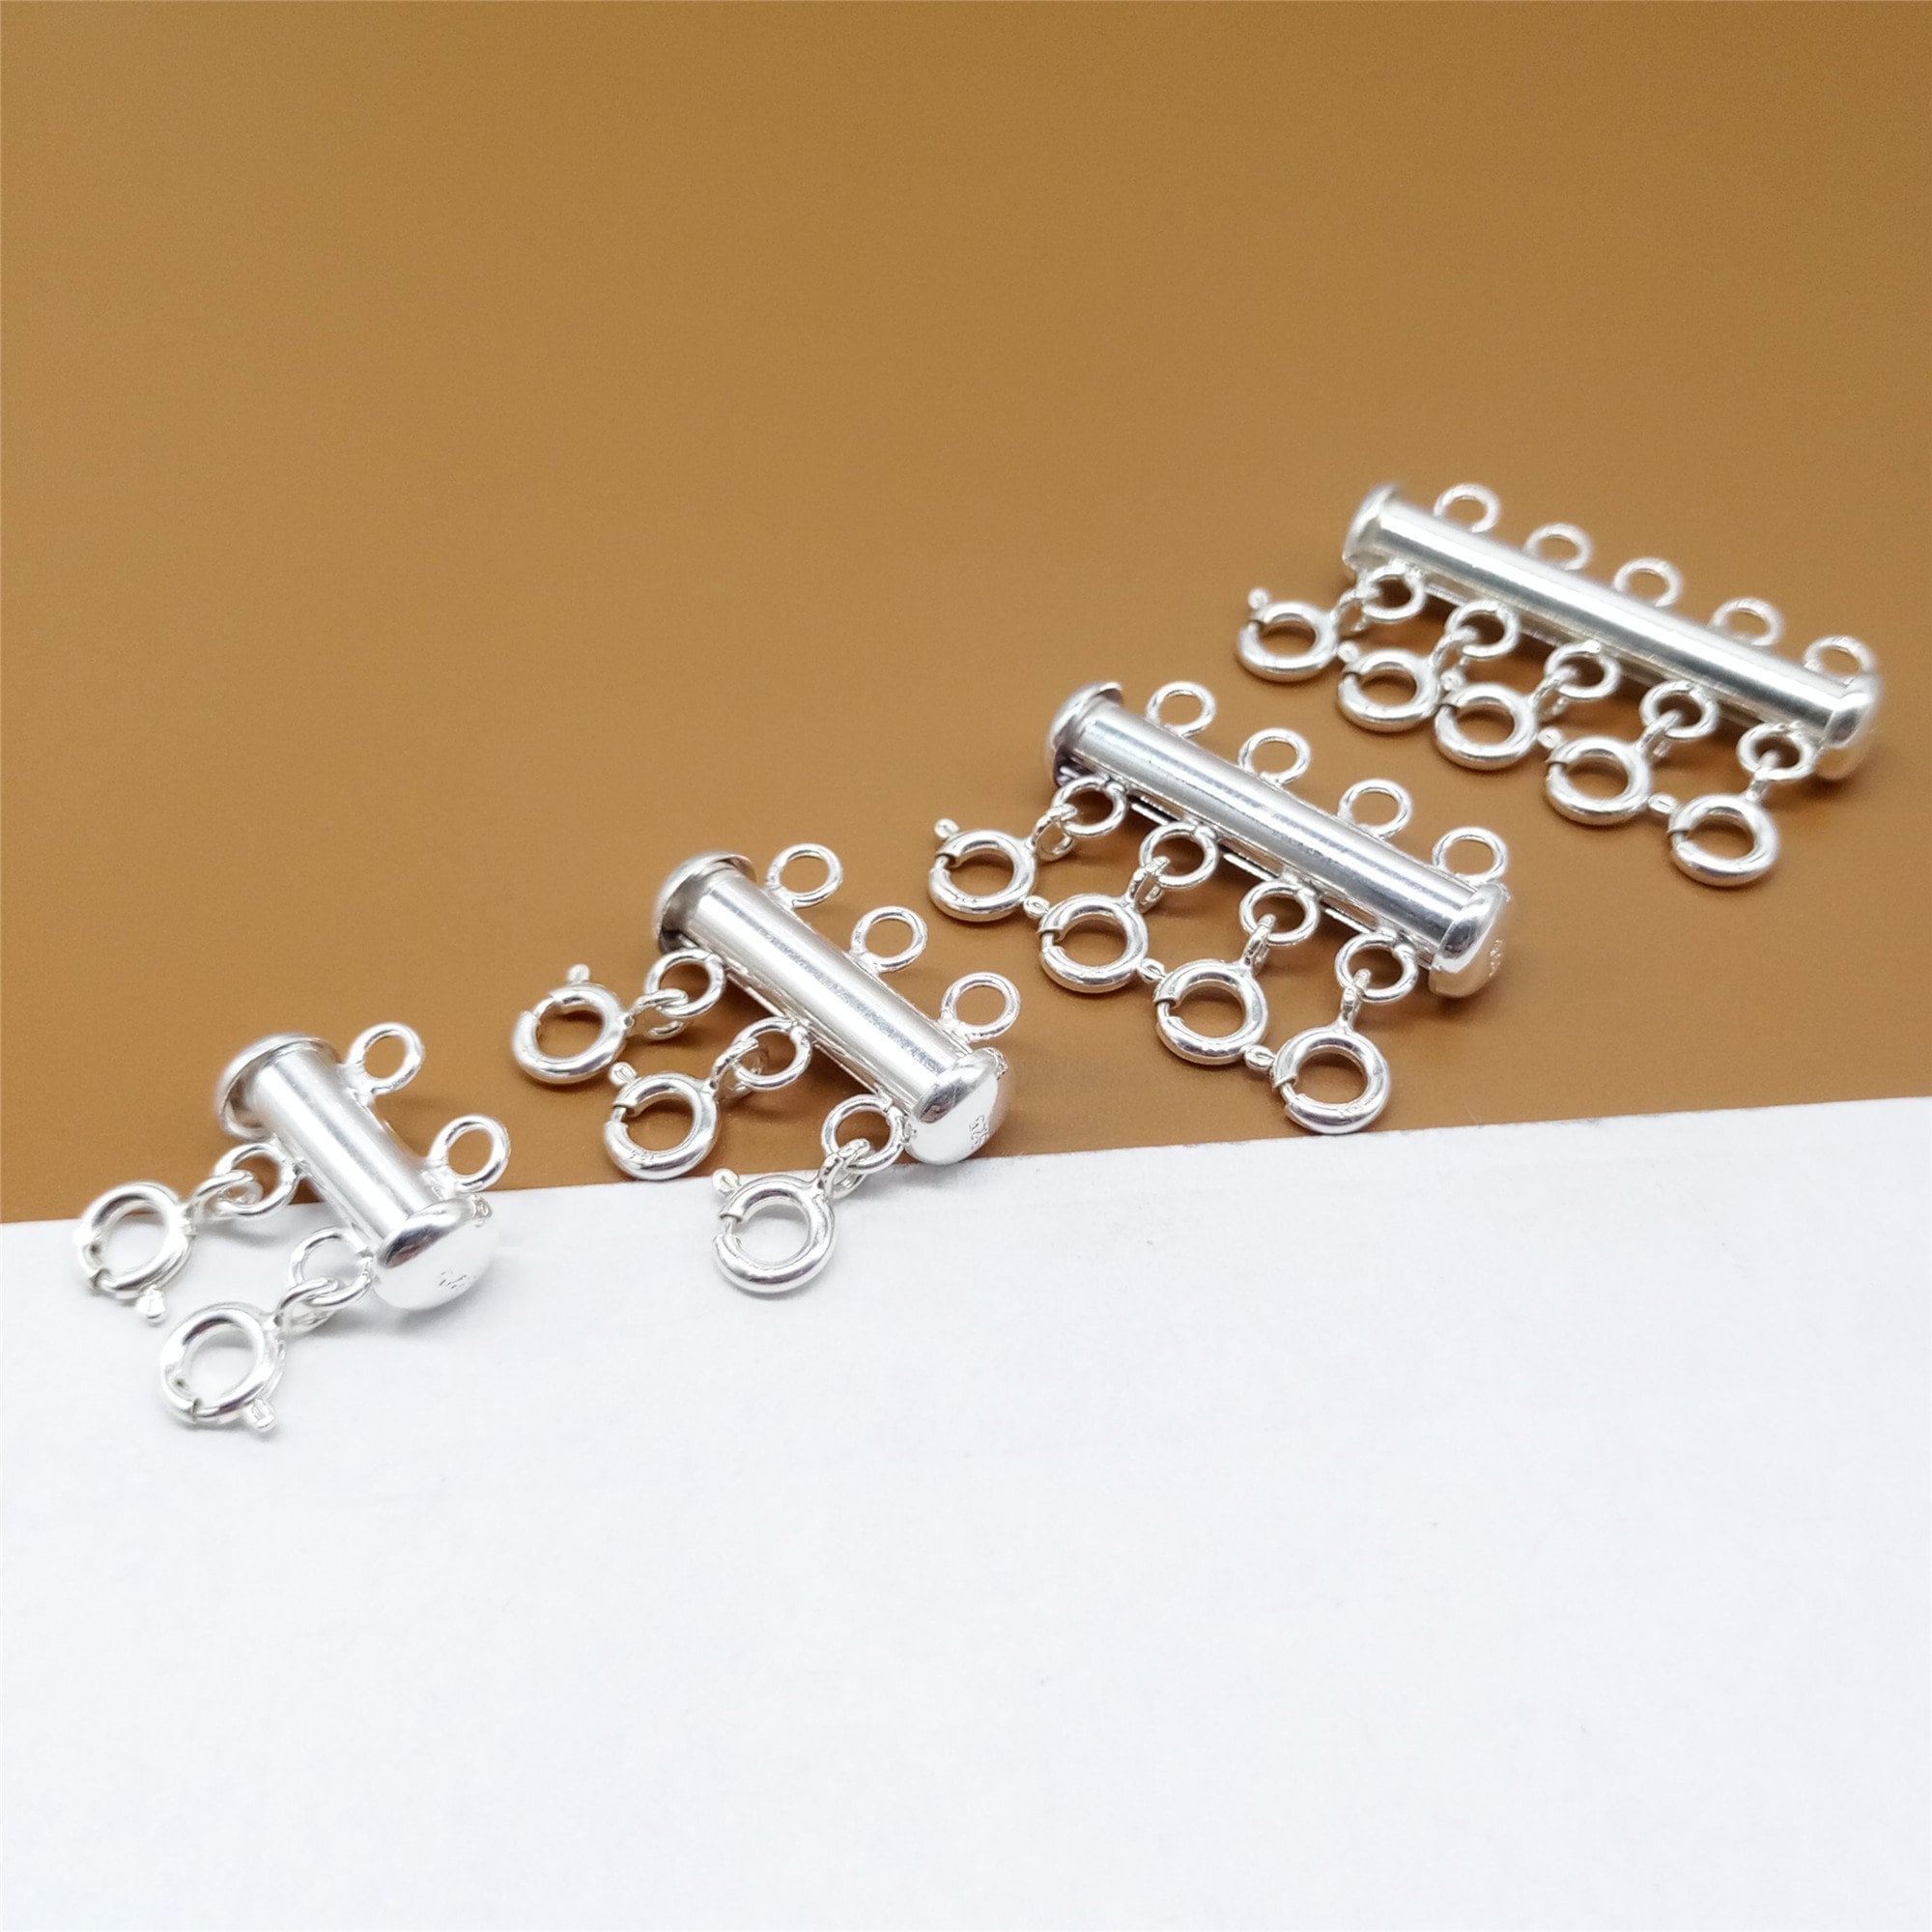 1 Piece 3 Strand Magnetic Clasps, 3 Hole Strong Magnetic Clasps, Multi  Strand Bracelet Closure Magnetic Necklace Clasp, Three Row Clasp D135 